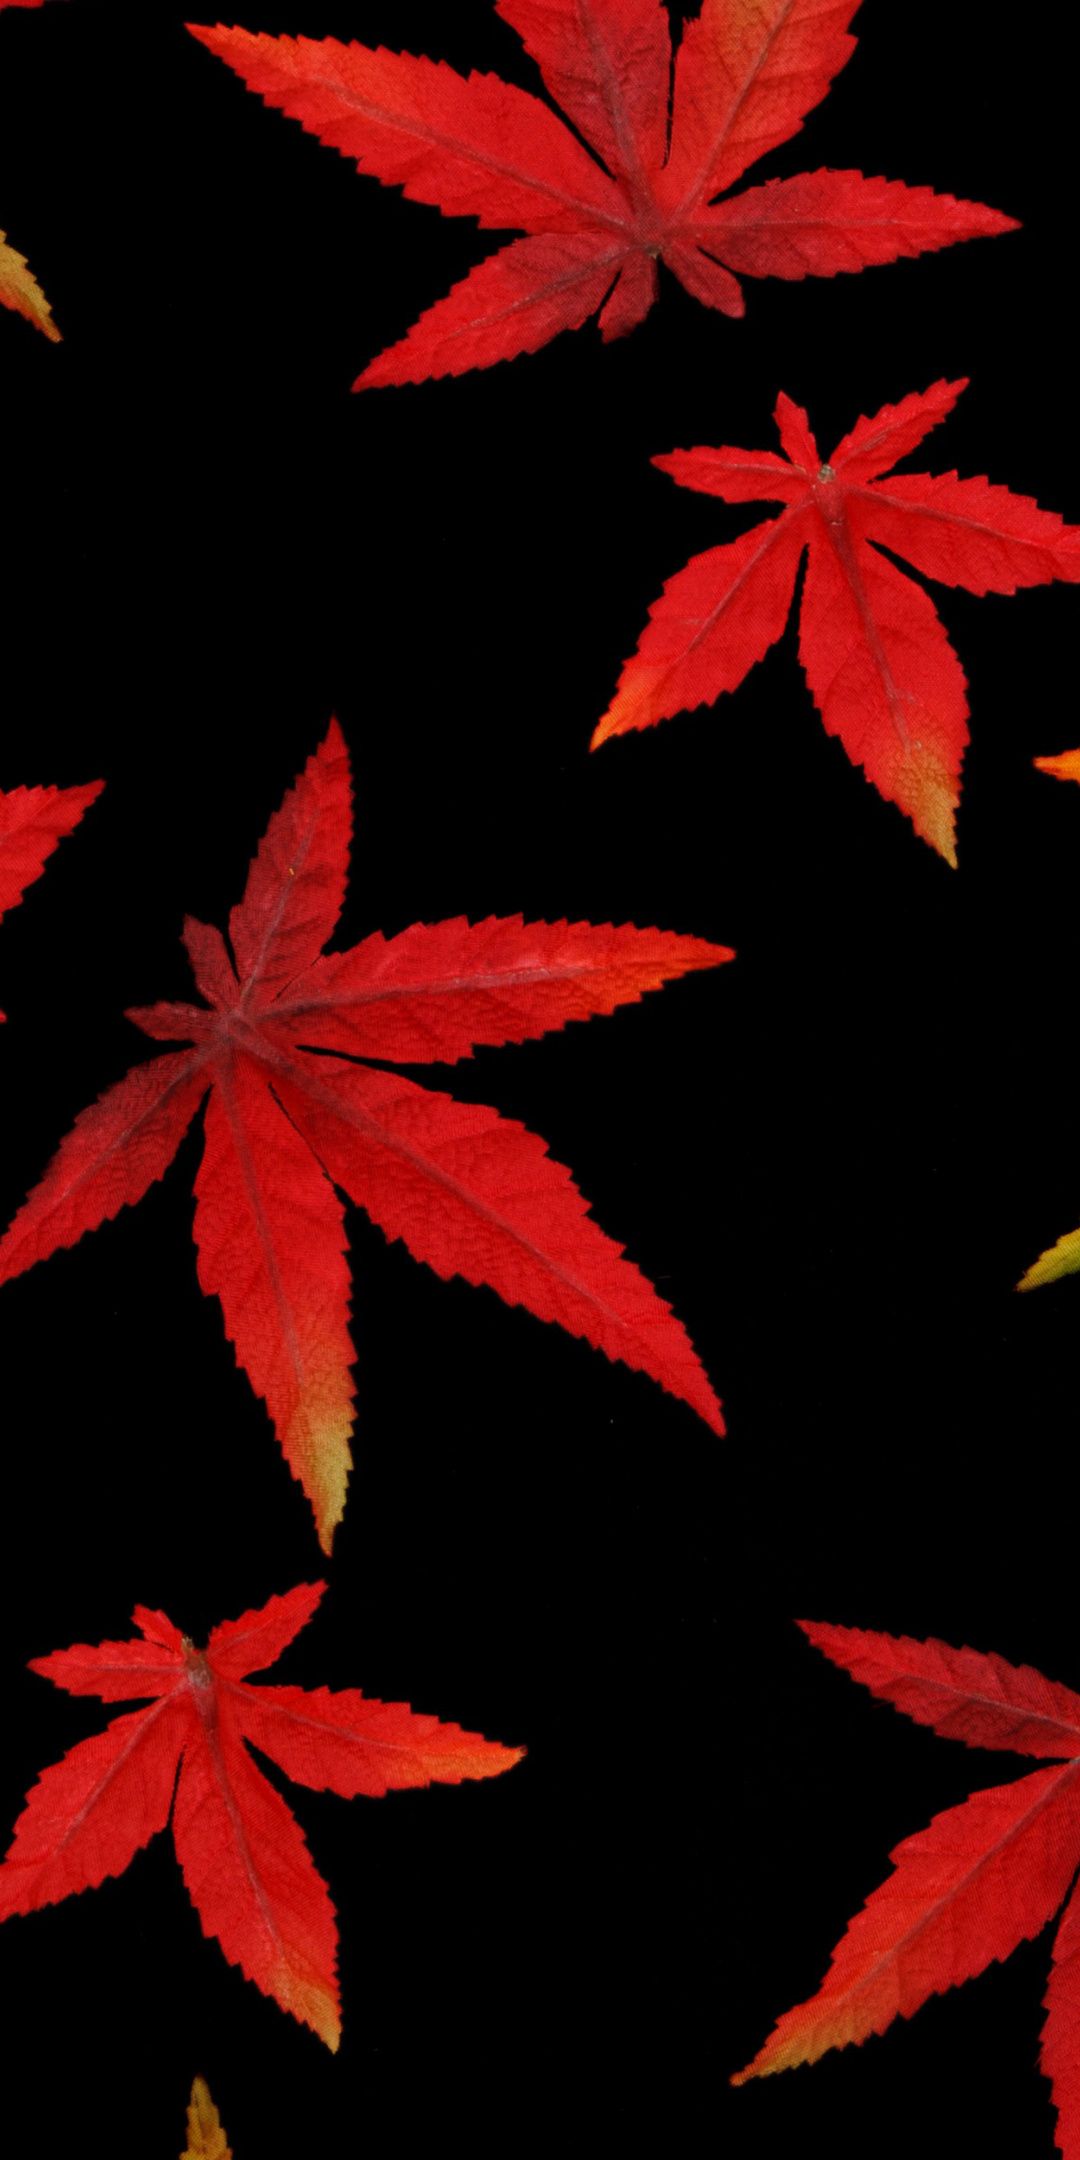 Autumn, leaves, abstract wallpaper. Abstract wallpaper, Abstract, Art wallpaper